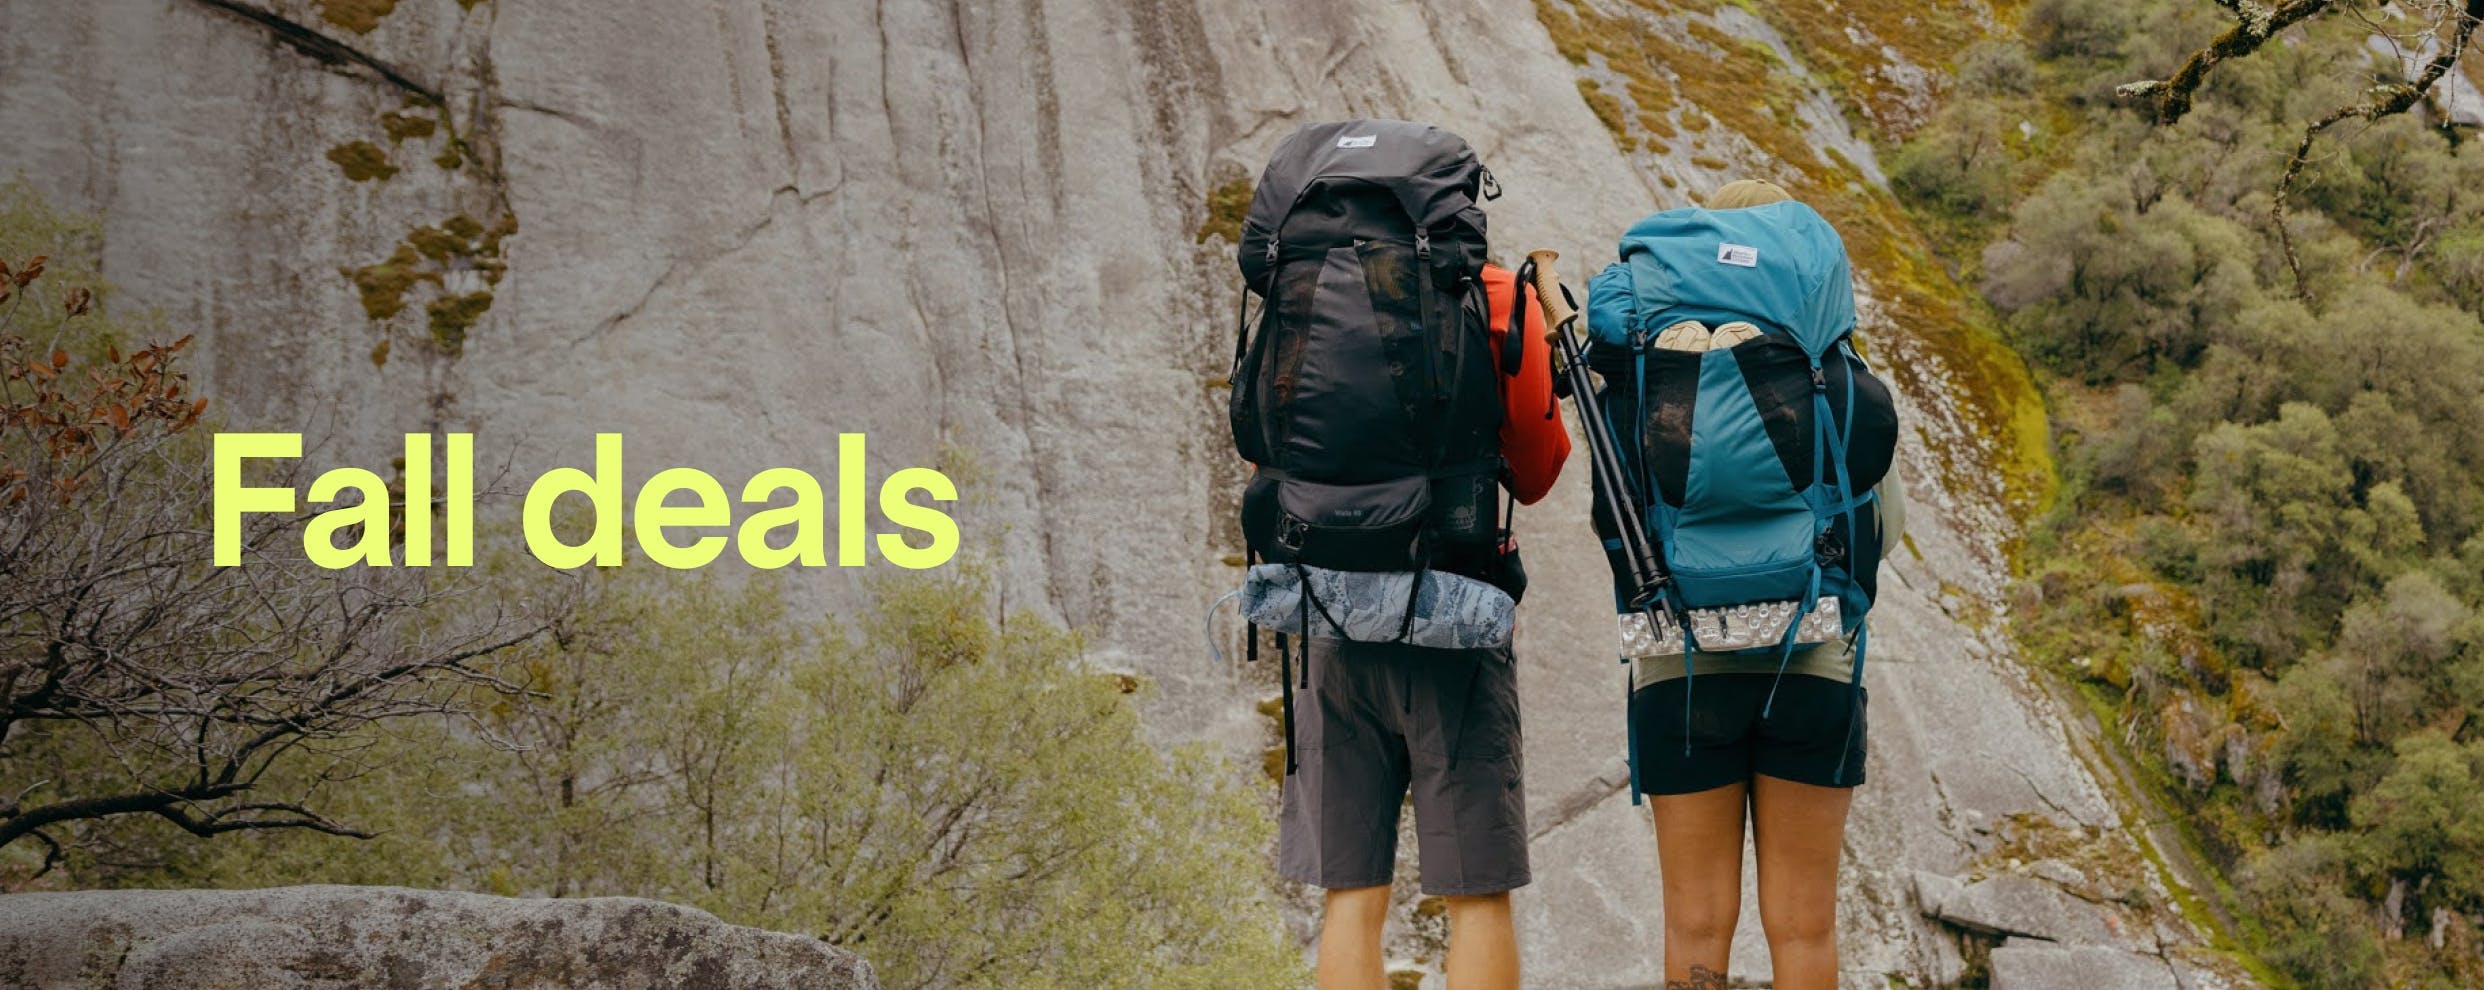 Pack it up and make your escape with deals on hiking packs, duffles and more.